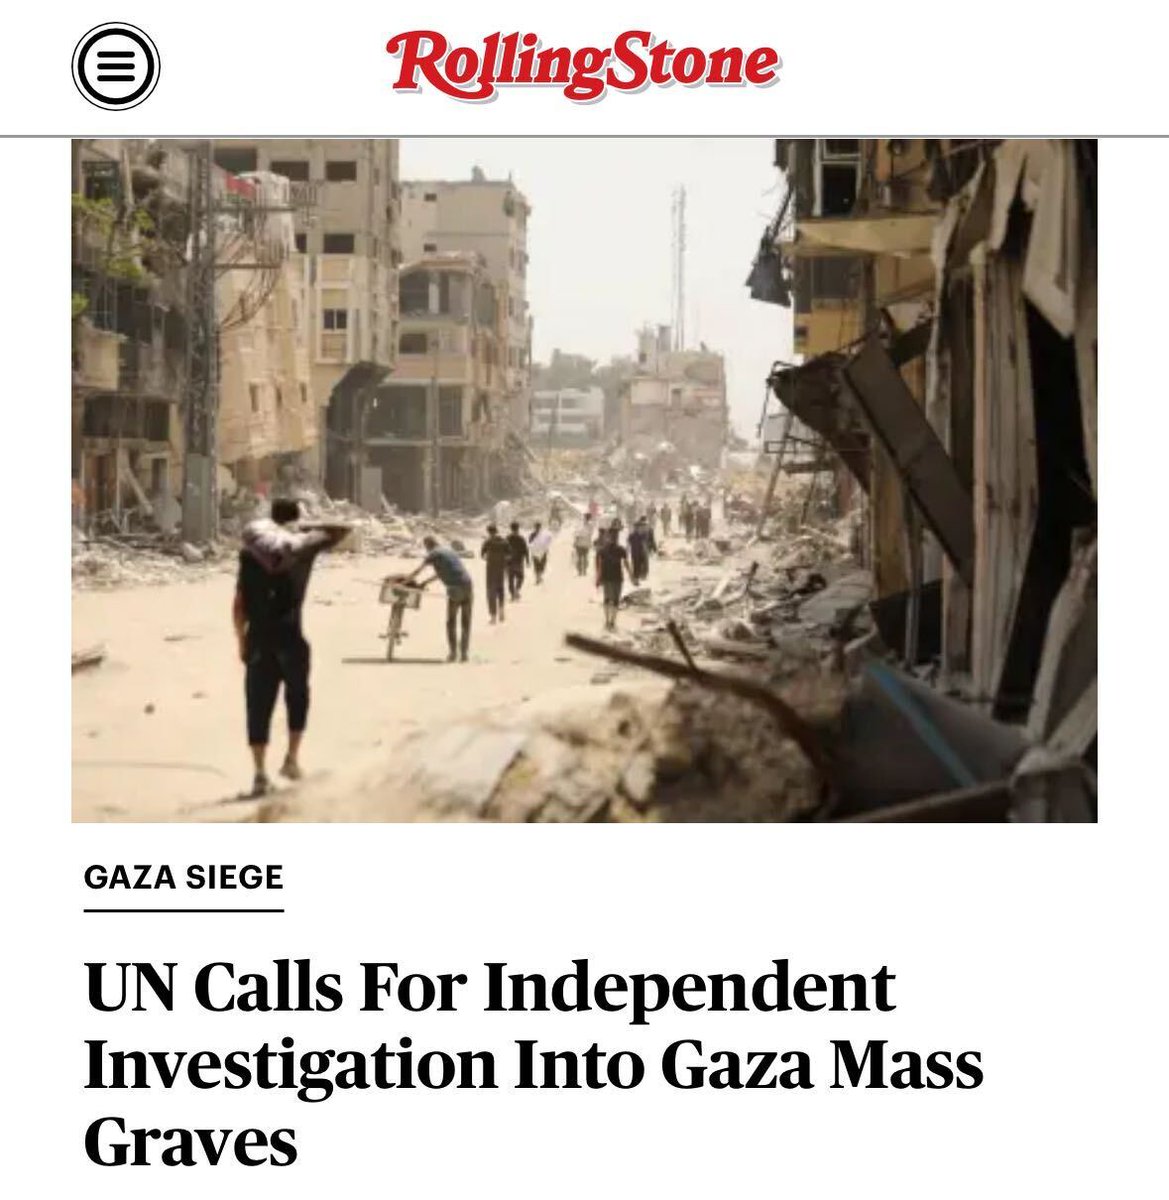 The United Nations is calling for an “independent, effective and transparent ” investigation into the discovery of mass graves at two major hospitals in Gaza following the withdrawal of Israeli troops from the occupied medical complexes.

More: rollingstone.com/politics/polit…